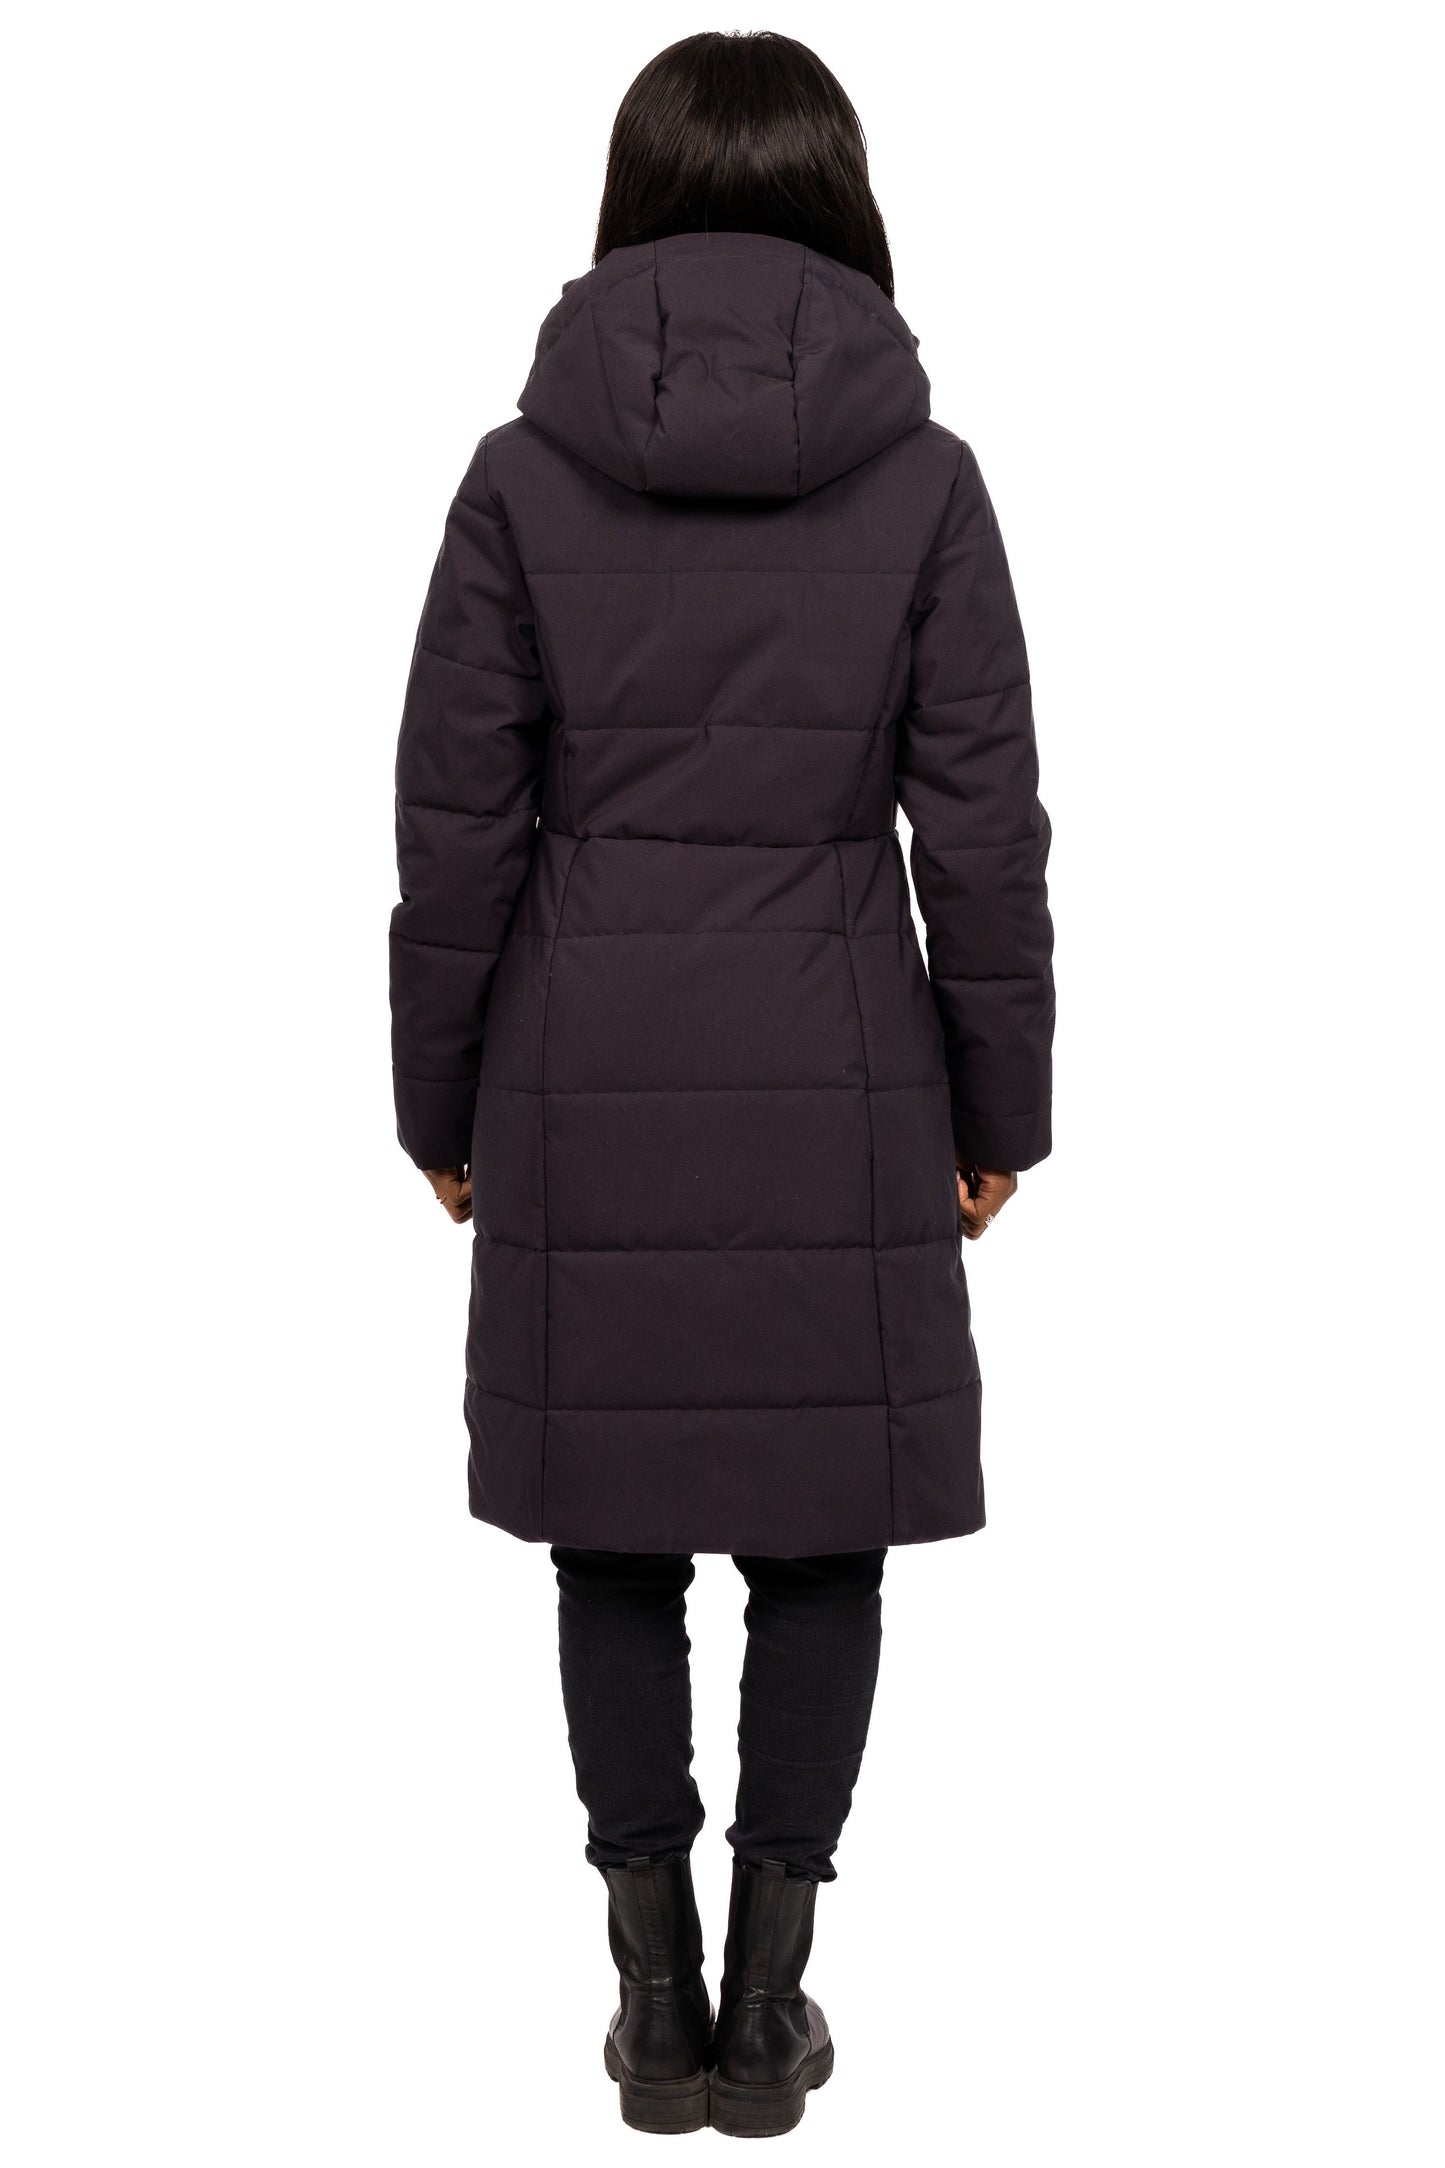 Desloups long women's parka fitted in Isosoft 250g